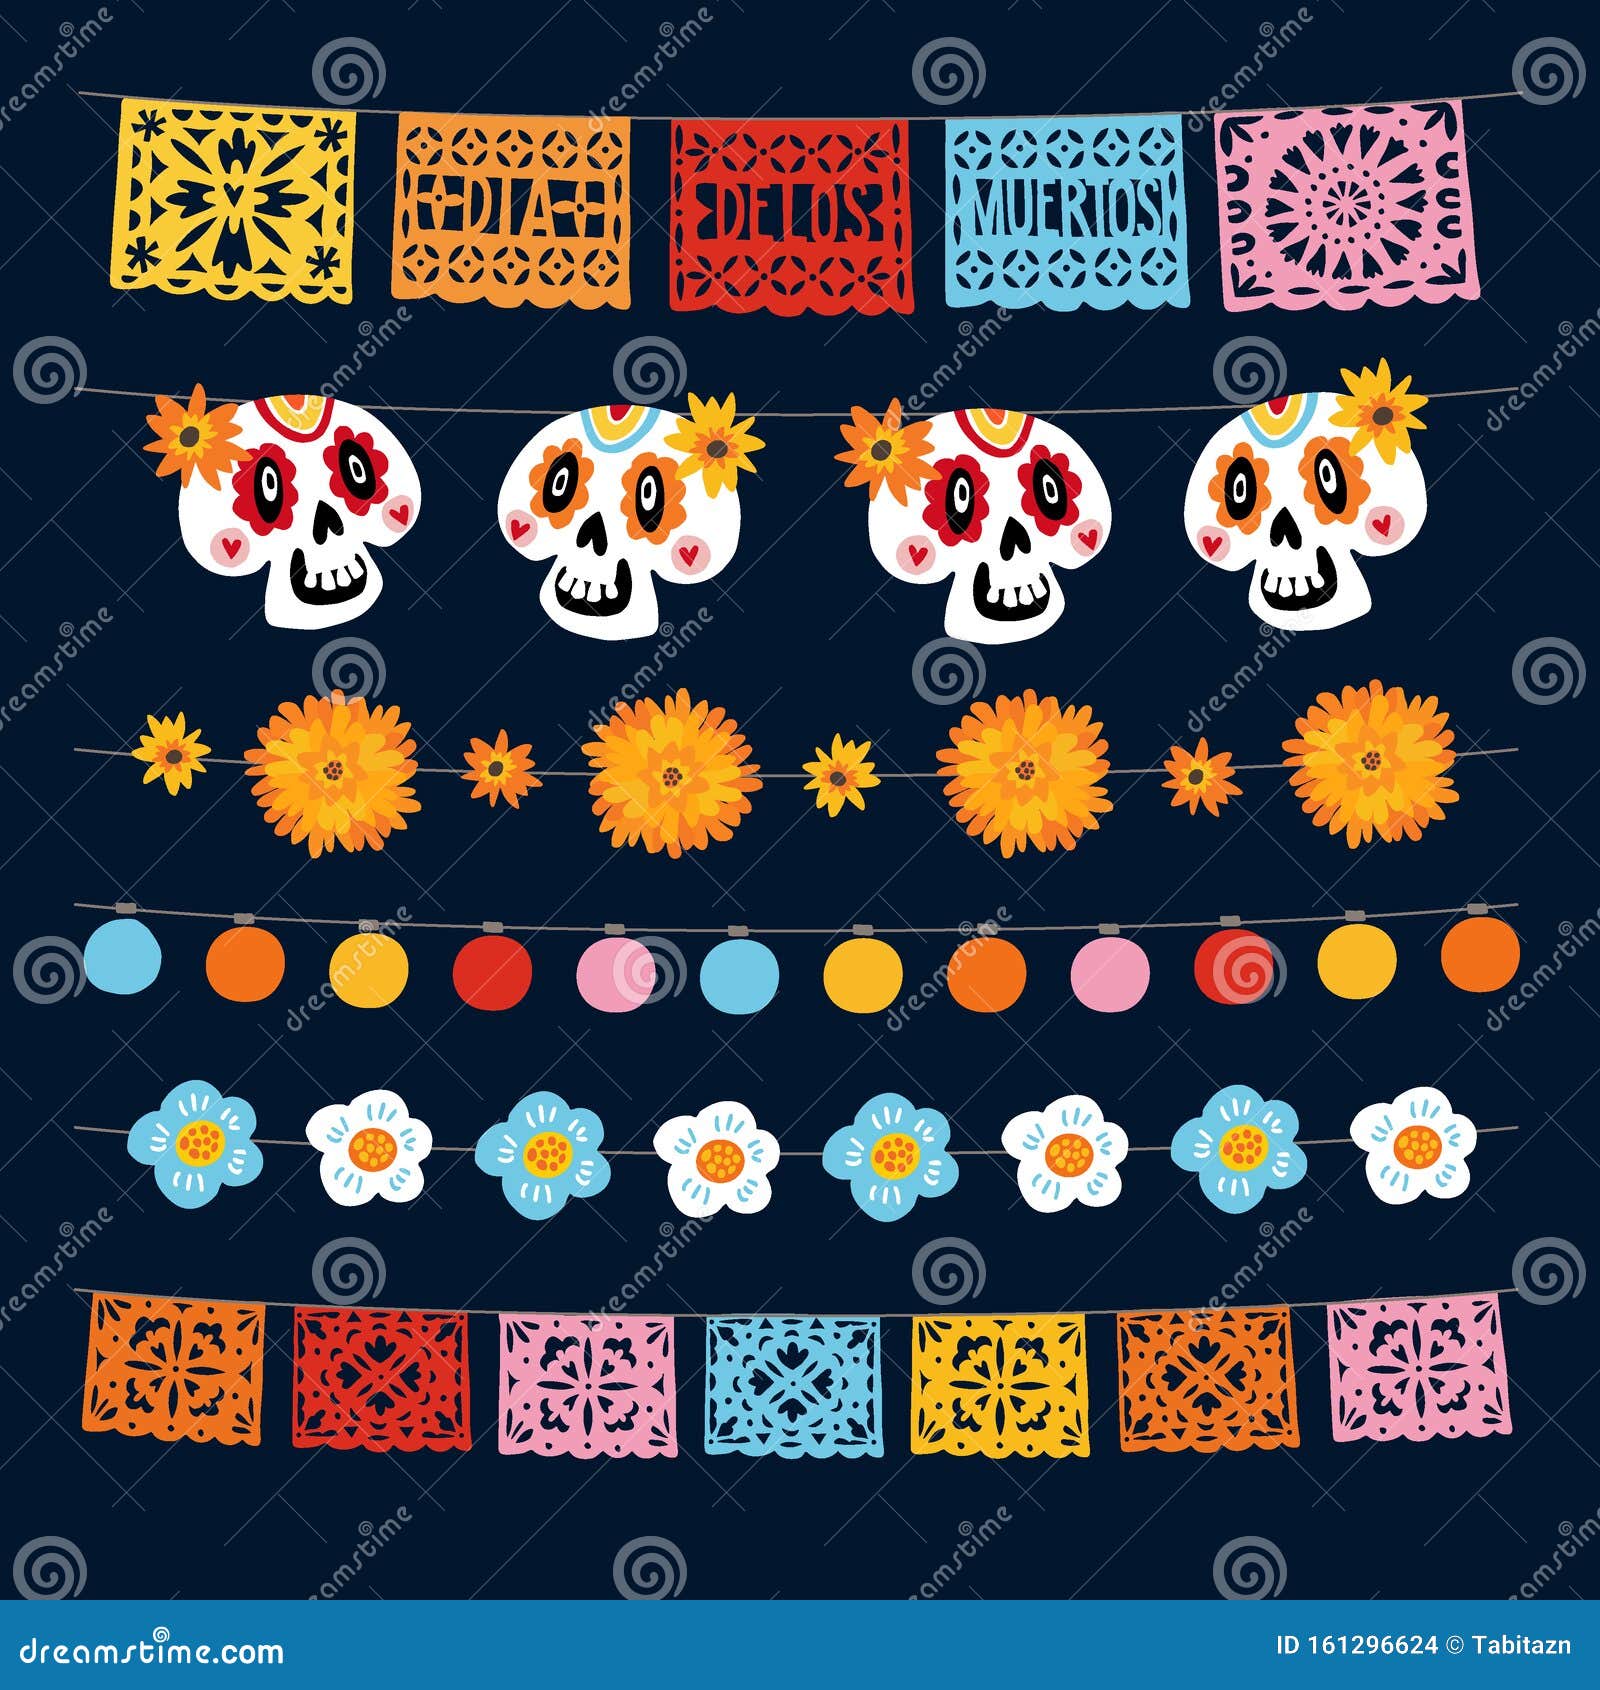 set of dia de los muertos, mexican day of the dead garlands with lights, bunting flags, papel picado, marigold and